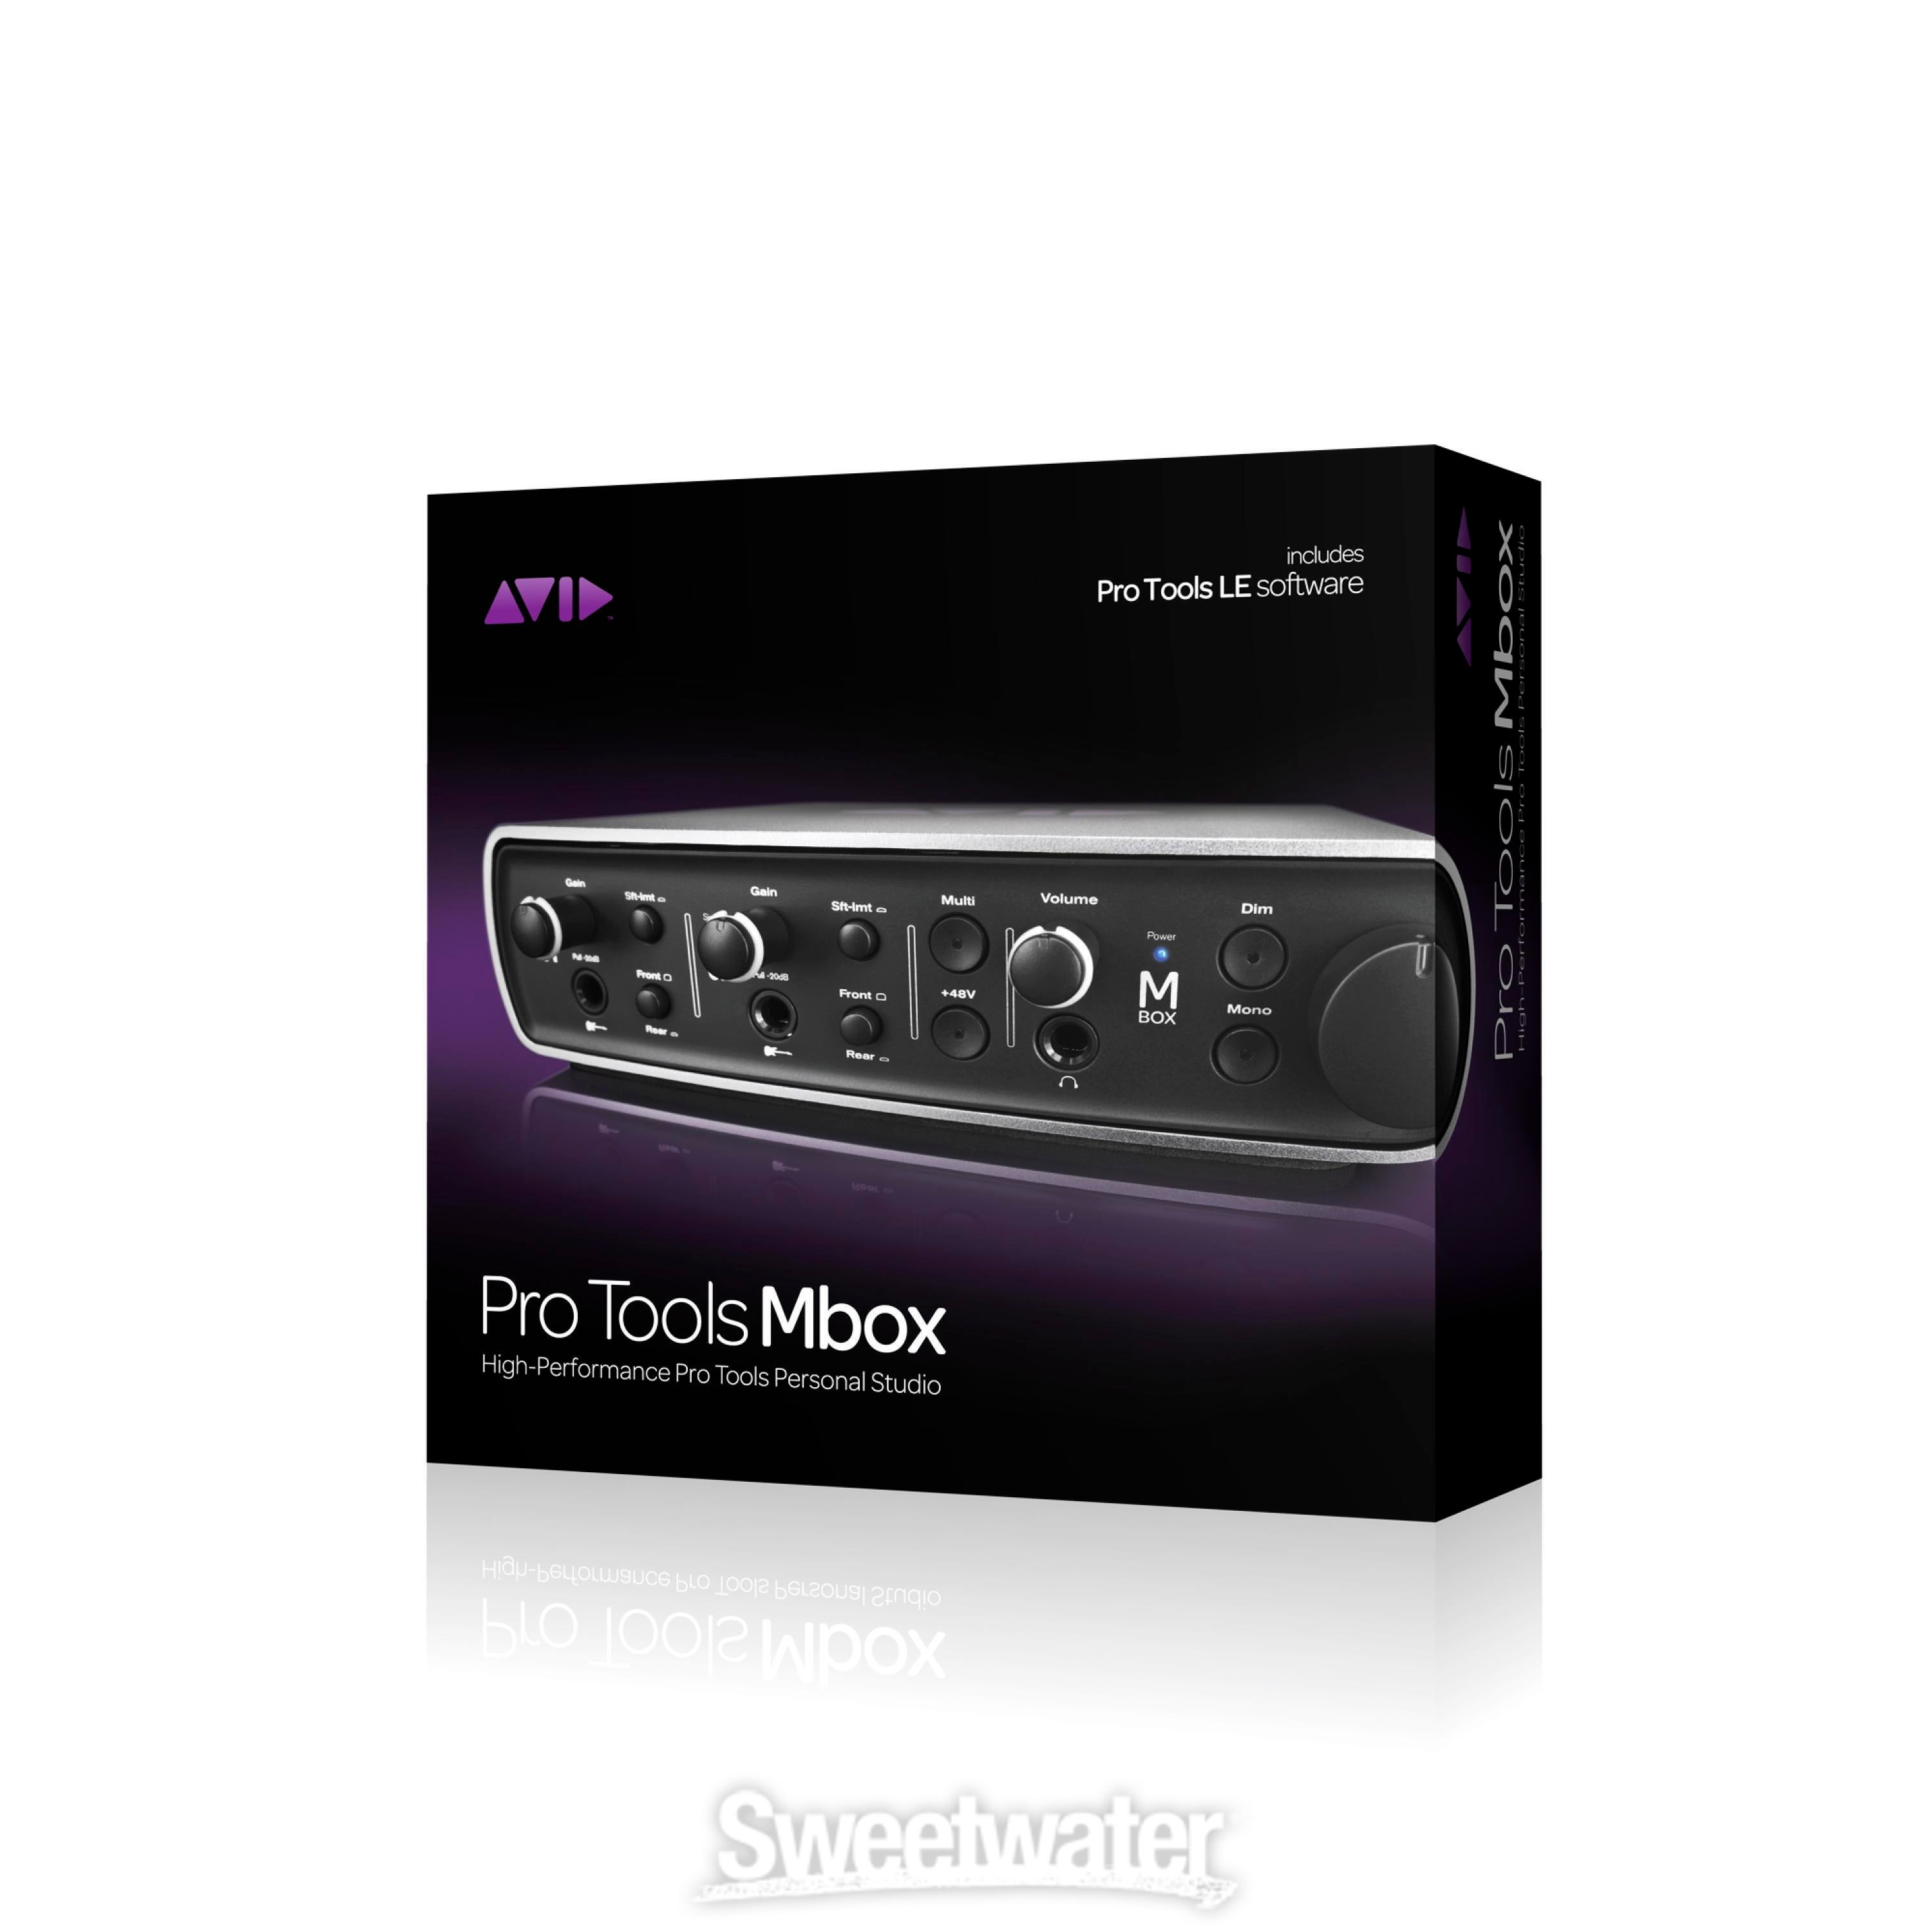 Avid Pro Tools Mbox - Mbox with Pro Tools LE v8 Reviews | Sweetwater